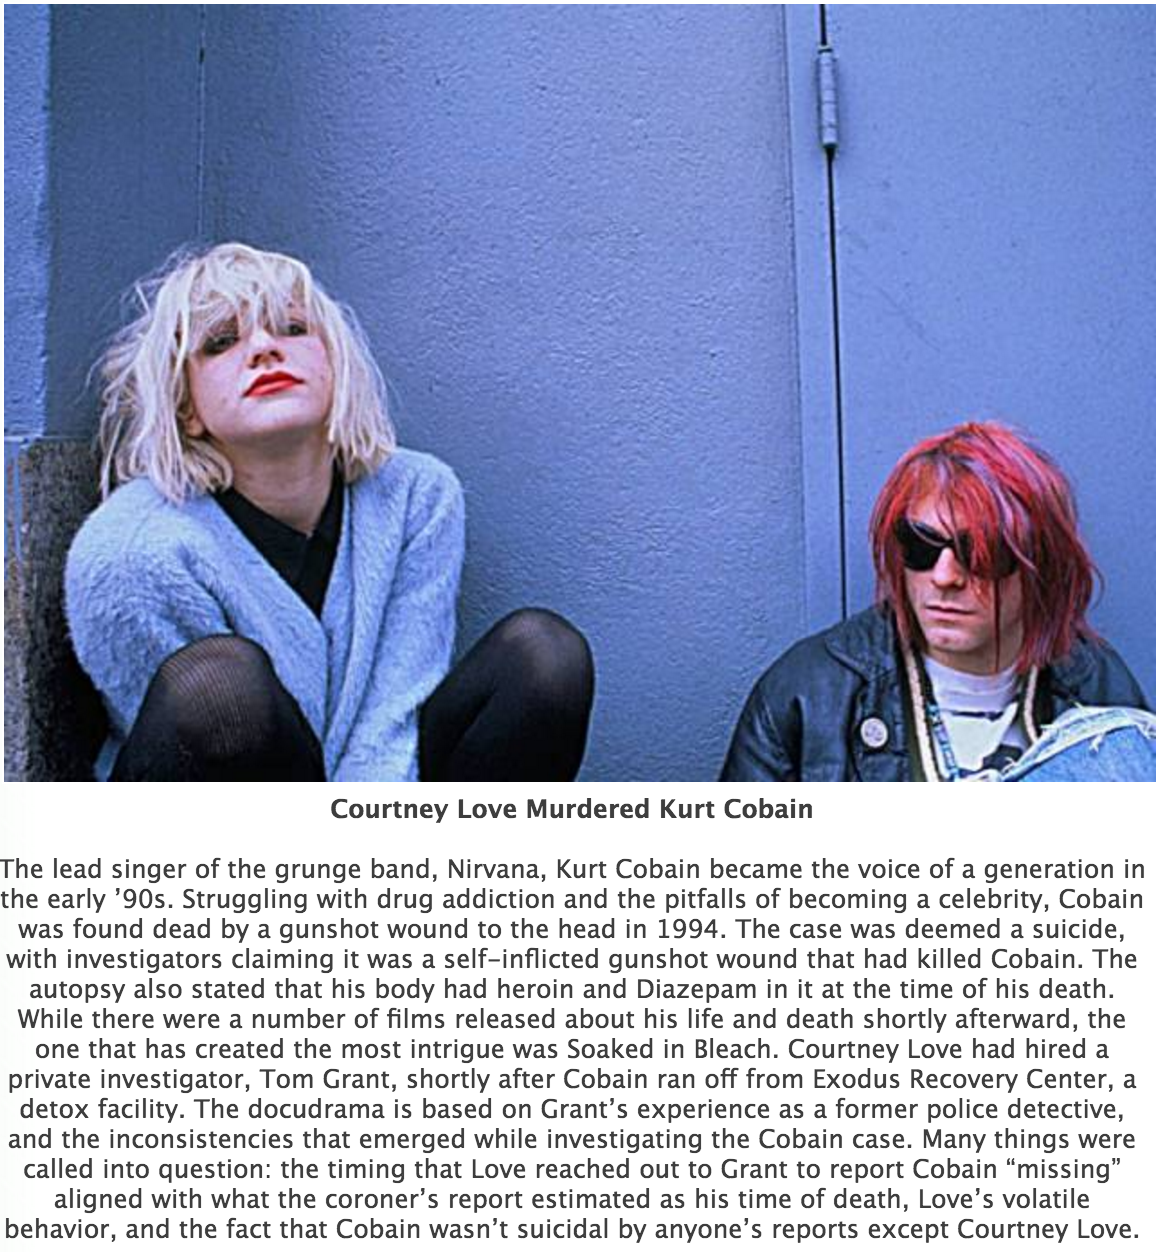 Courtney Love - Courtney Love Murdered Kurt Cobain The lead singer of the grunge band, Nirvana, Kurt Cobain became the voice of a generation in the early '90s. Struggling with drug addiction and the pitfalls of becoming a celebrity, Cobain was found dead 